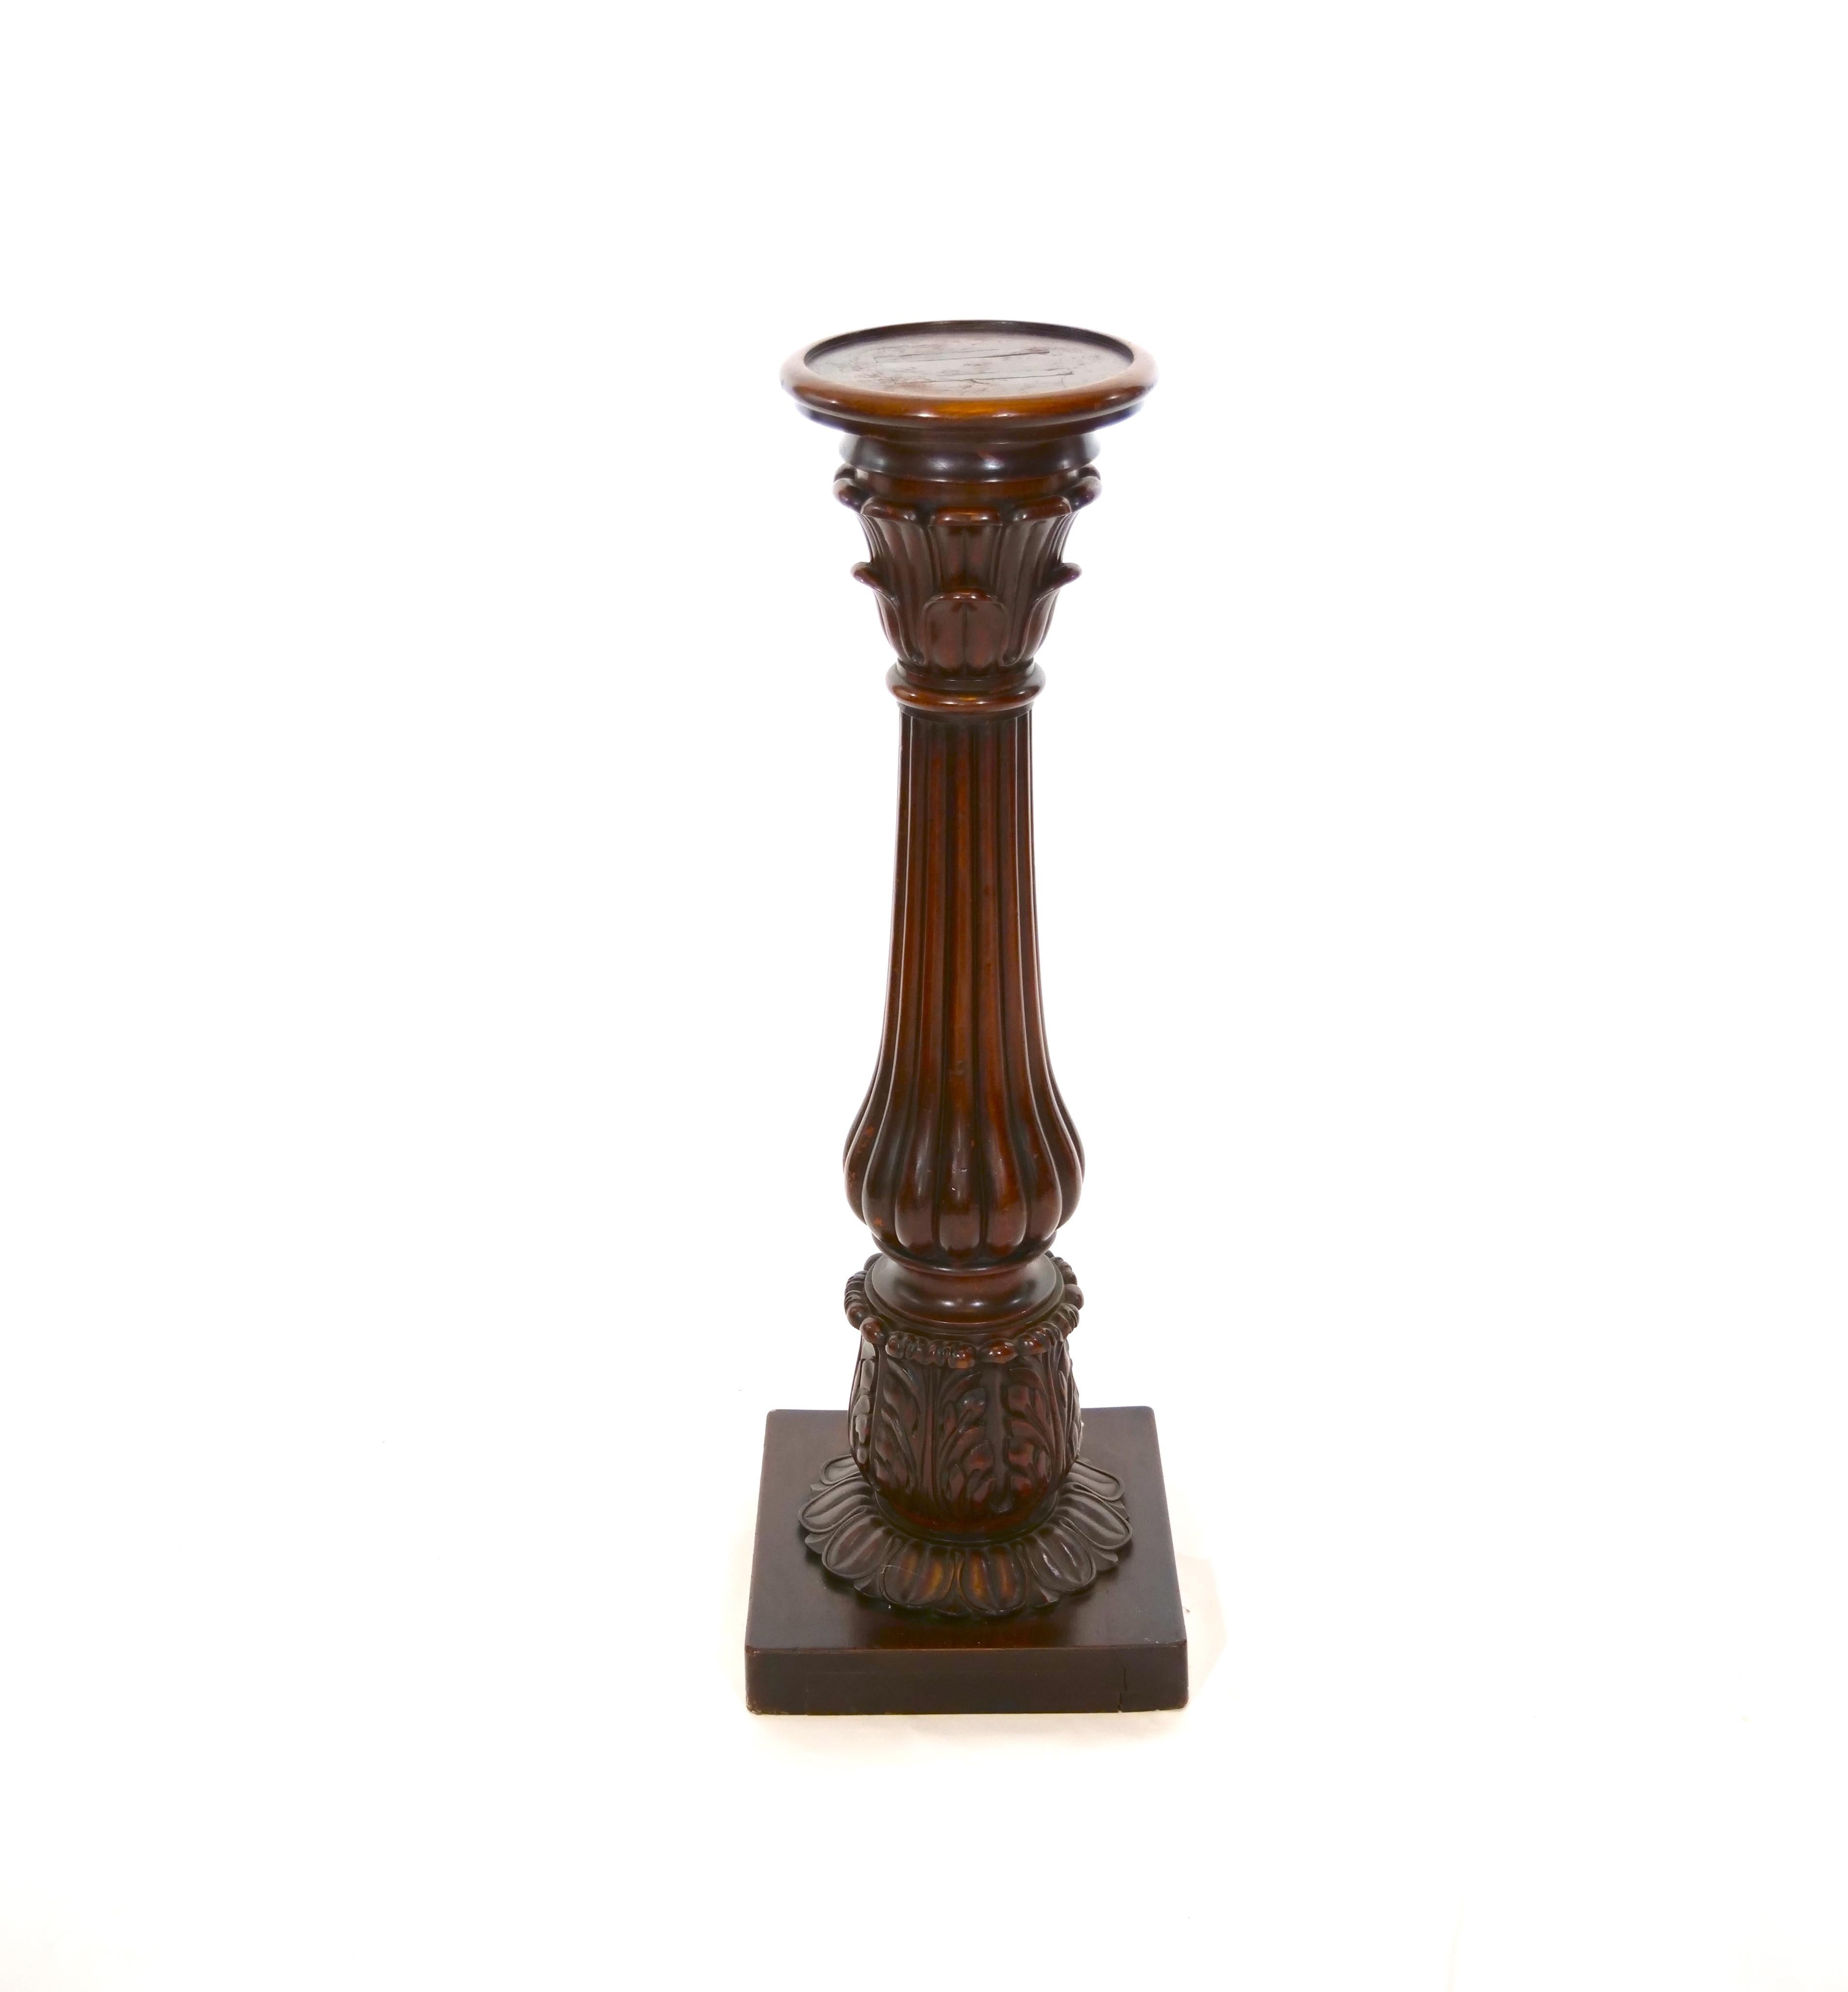 Early 19th century mahogany wood Regency style pedestal stand / table. The pedestal features hand carved design details resting on a squared based. The pedestal table is in good antique condition. Appropriate wear consistent with age/ use. It